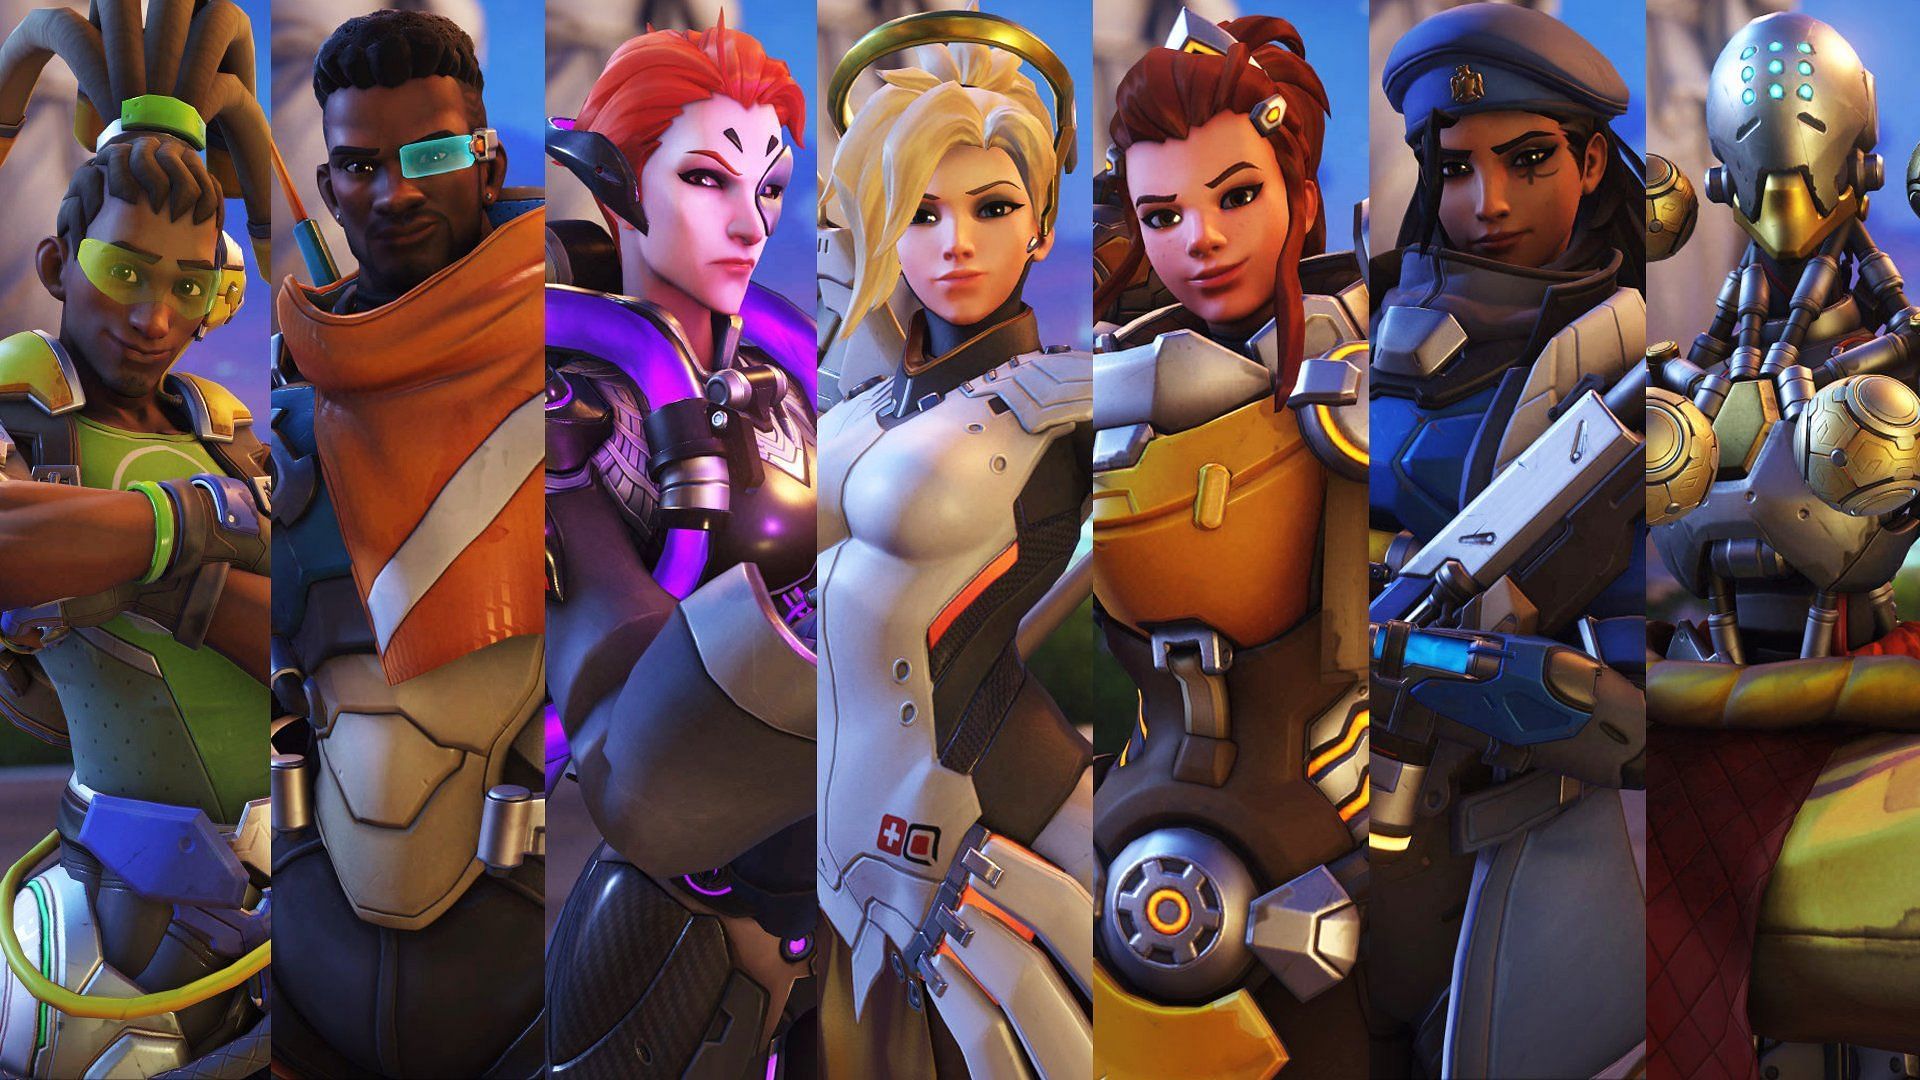 Overwatch Female Characters: Every Female Character in the Game